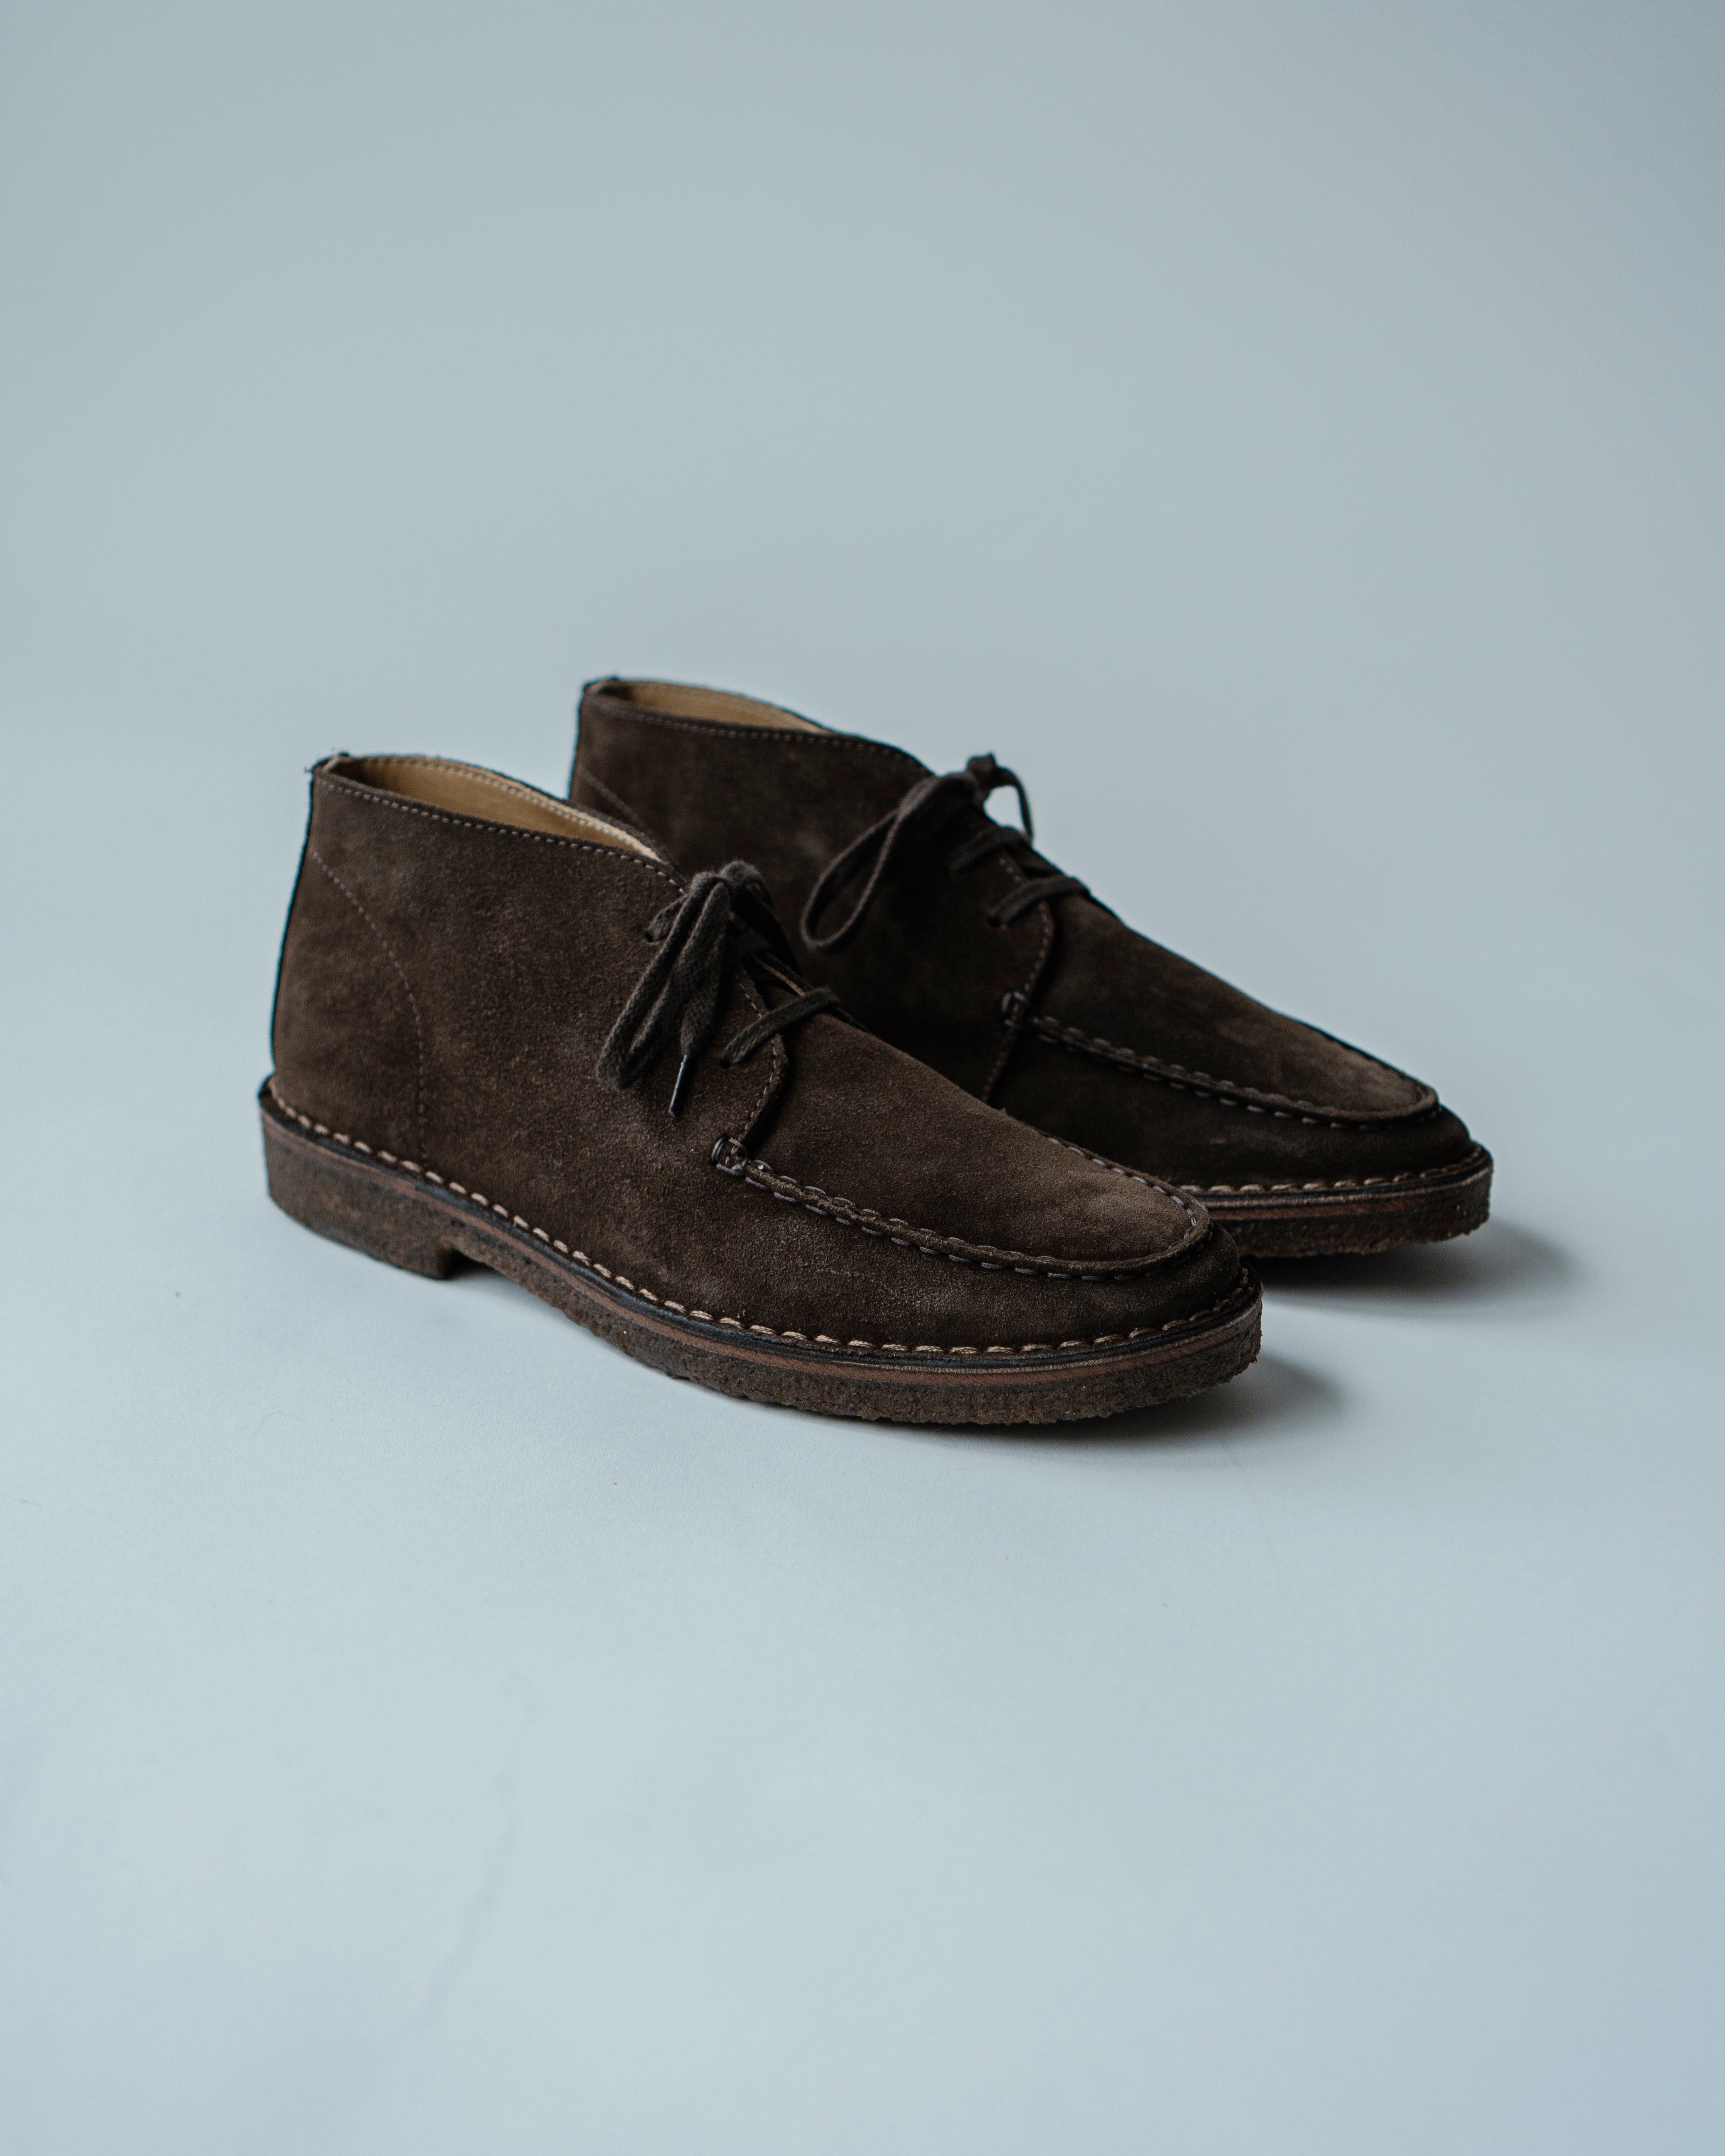 Mocassin Suede Shoes- Crosby Shoes, Drake's - The Signet Store